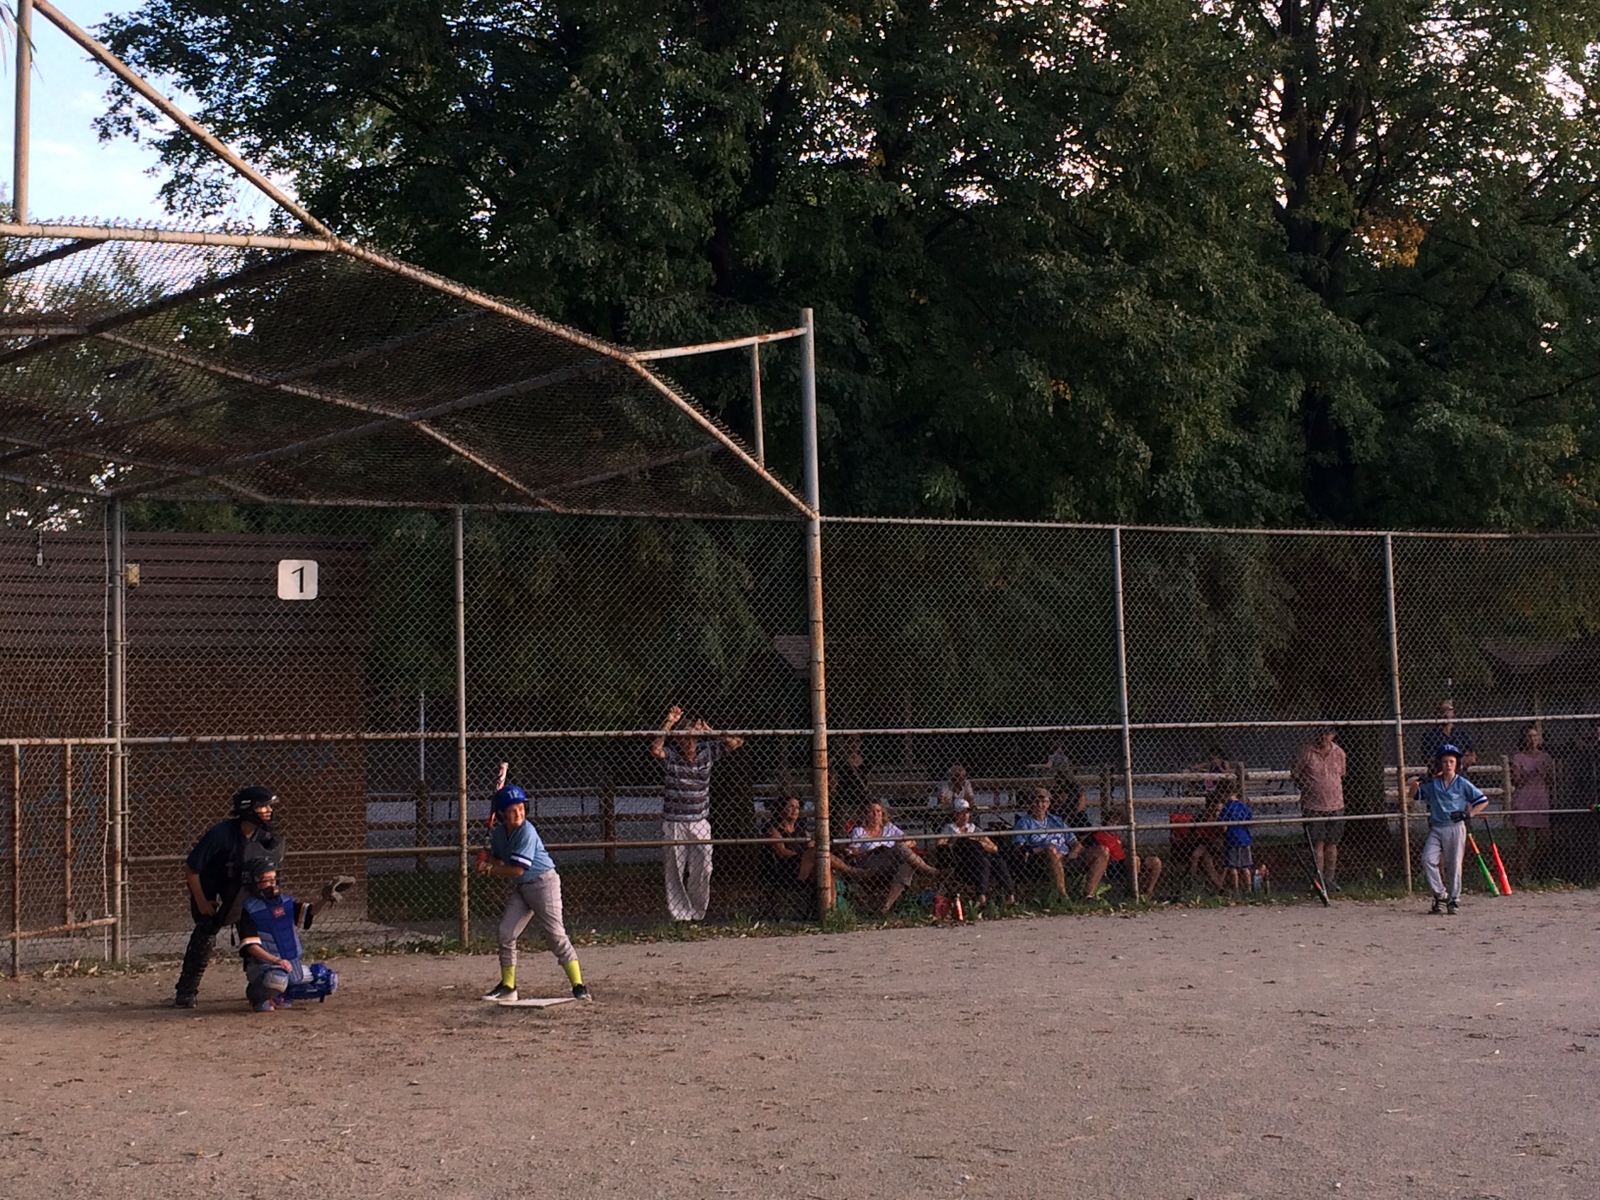 The Mariners and Royals in action during their Mosquito Division round robin tournament game at the Bickford Park South Diamond.